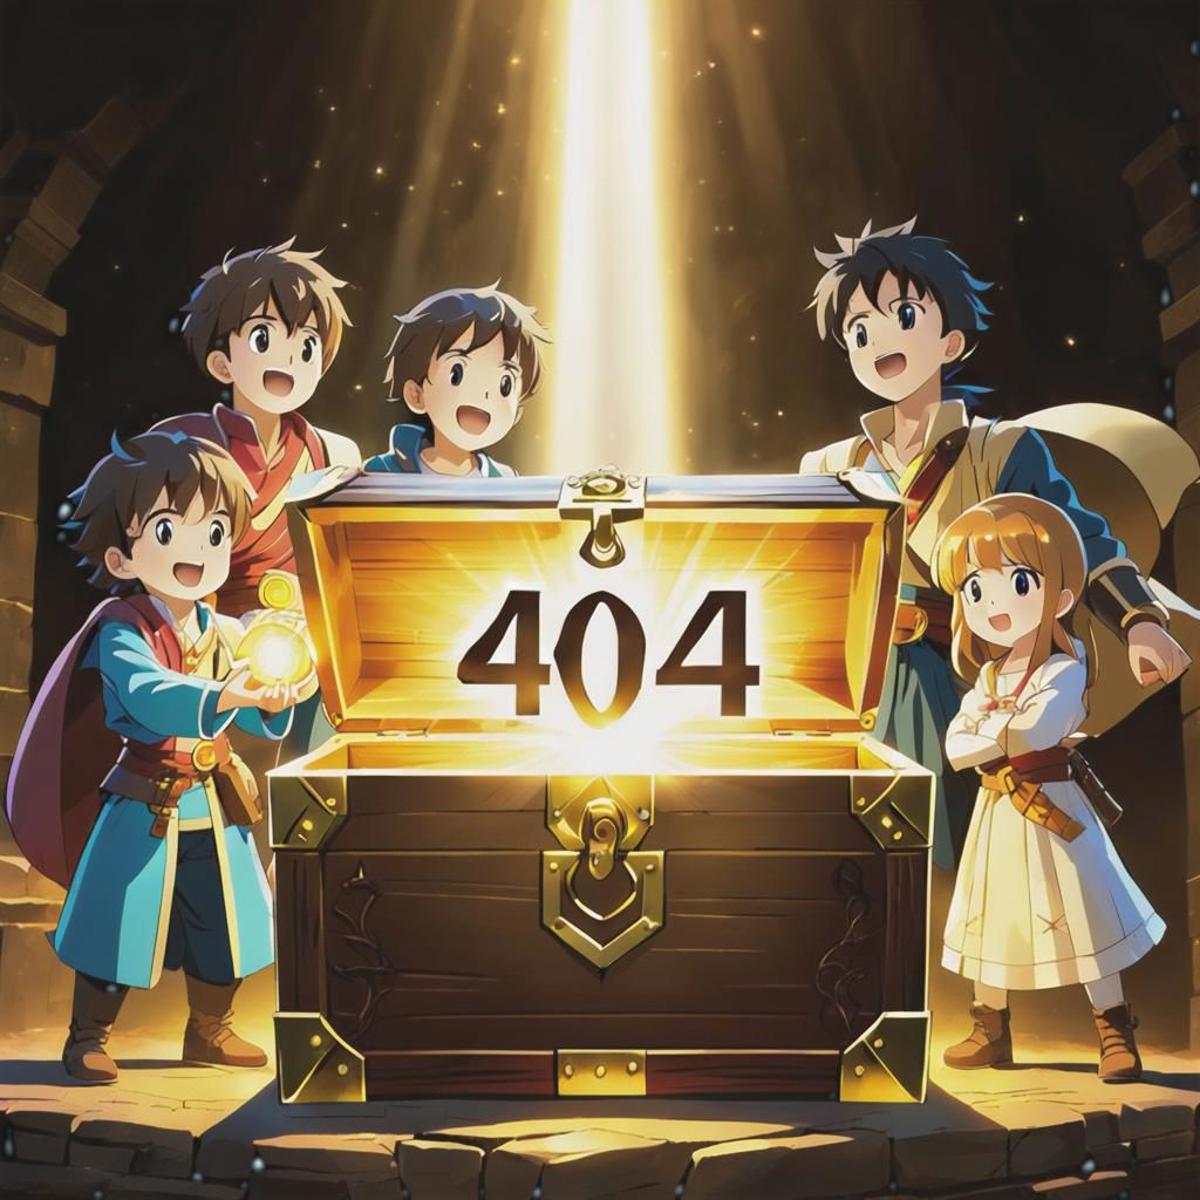 A group of four young boys posing in front of a golden treasure chest labeled 404.